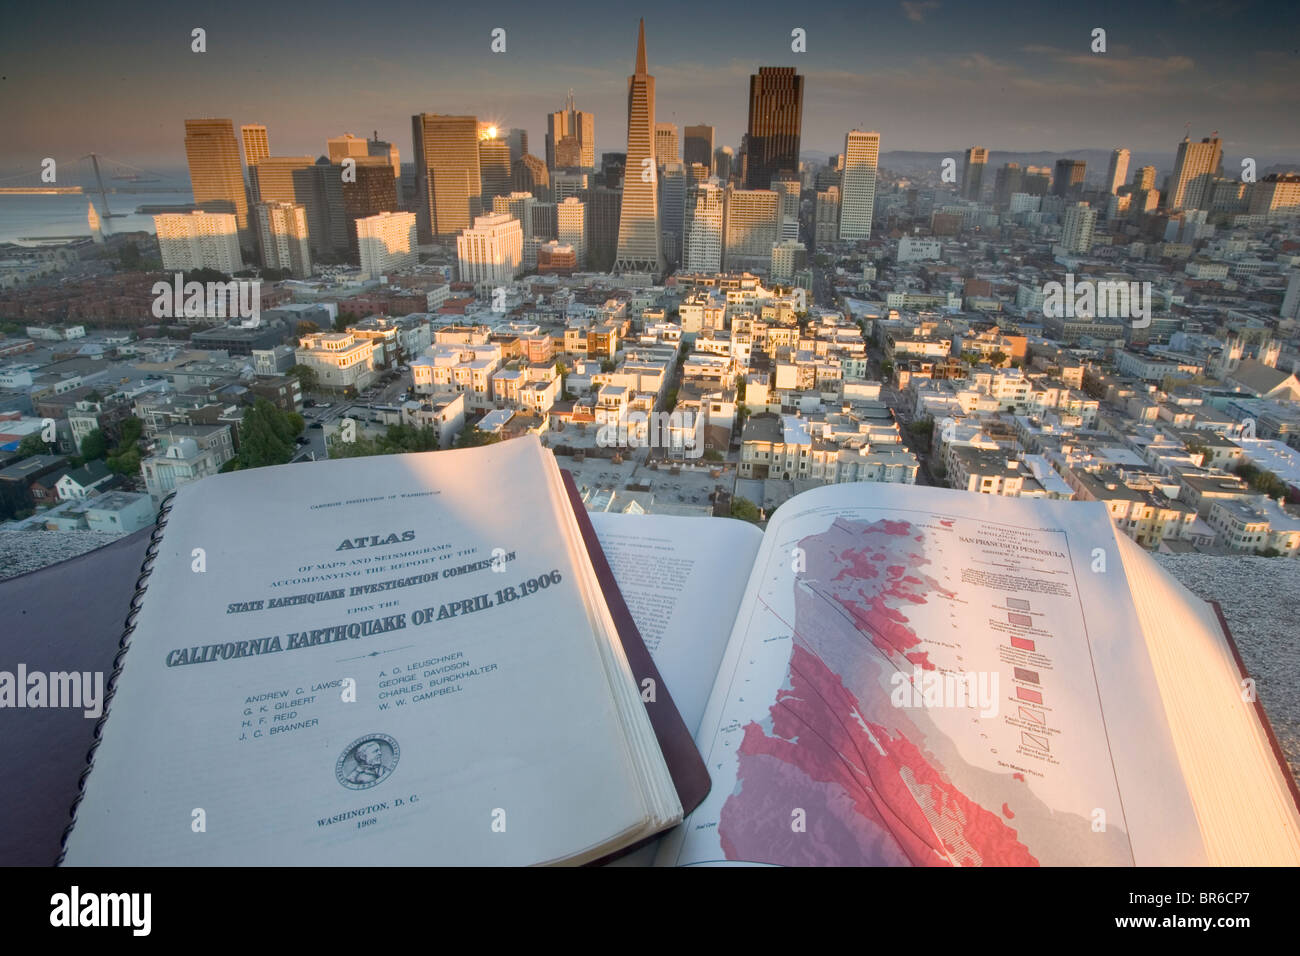 The Lawson Report with the city of San Francisco in the background. Stock Photo